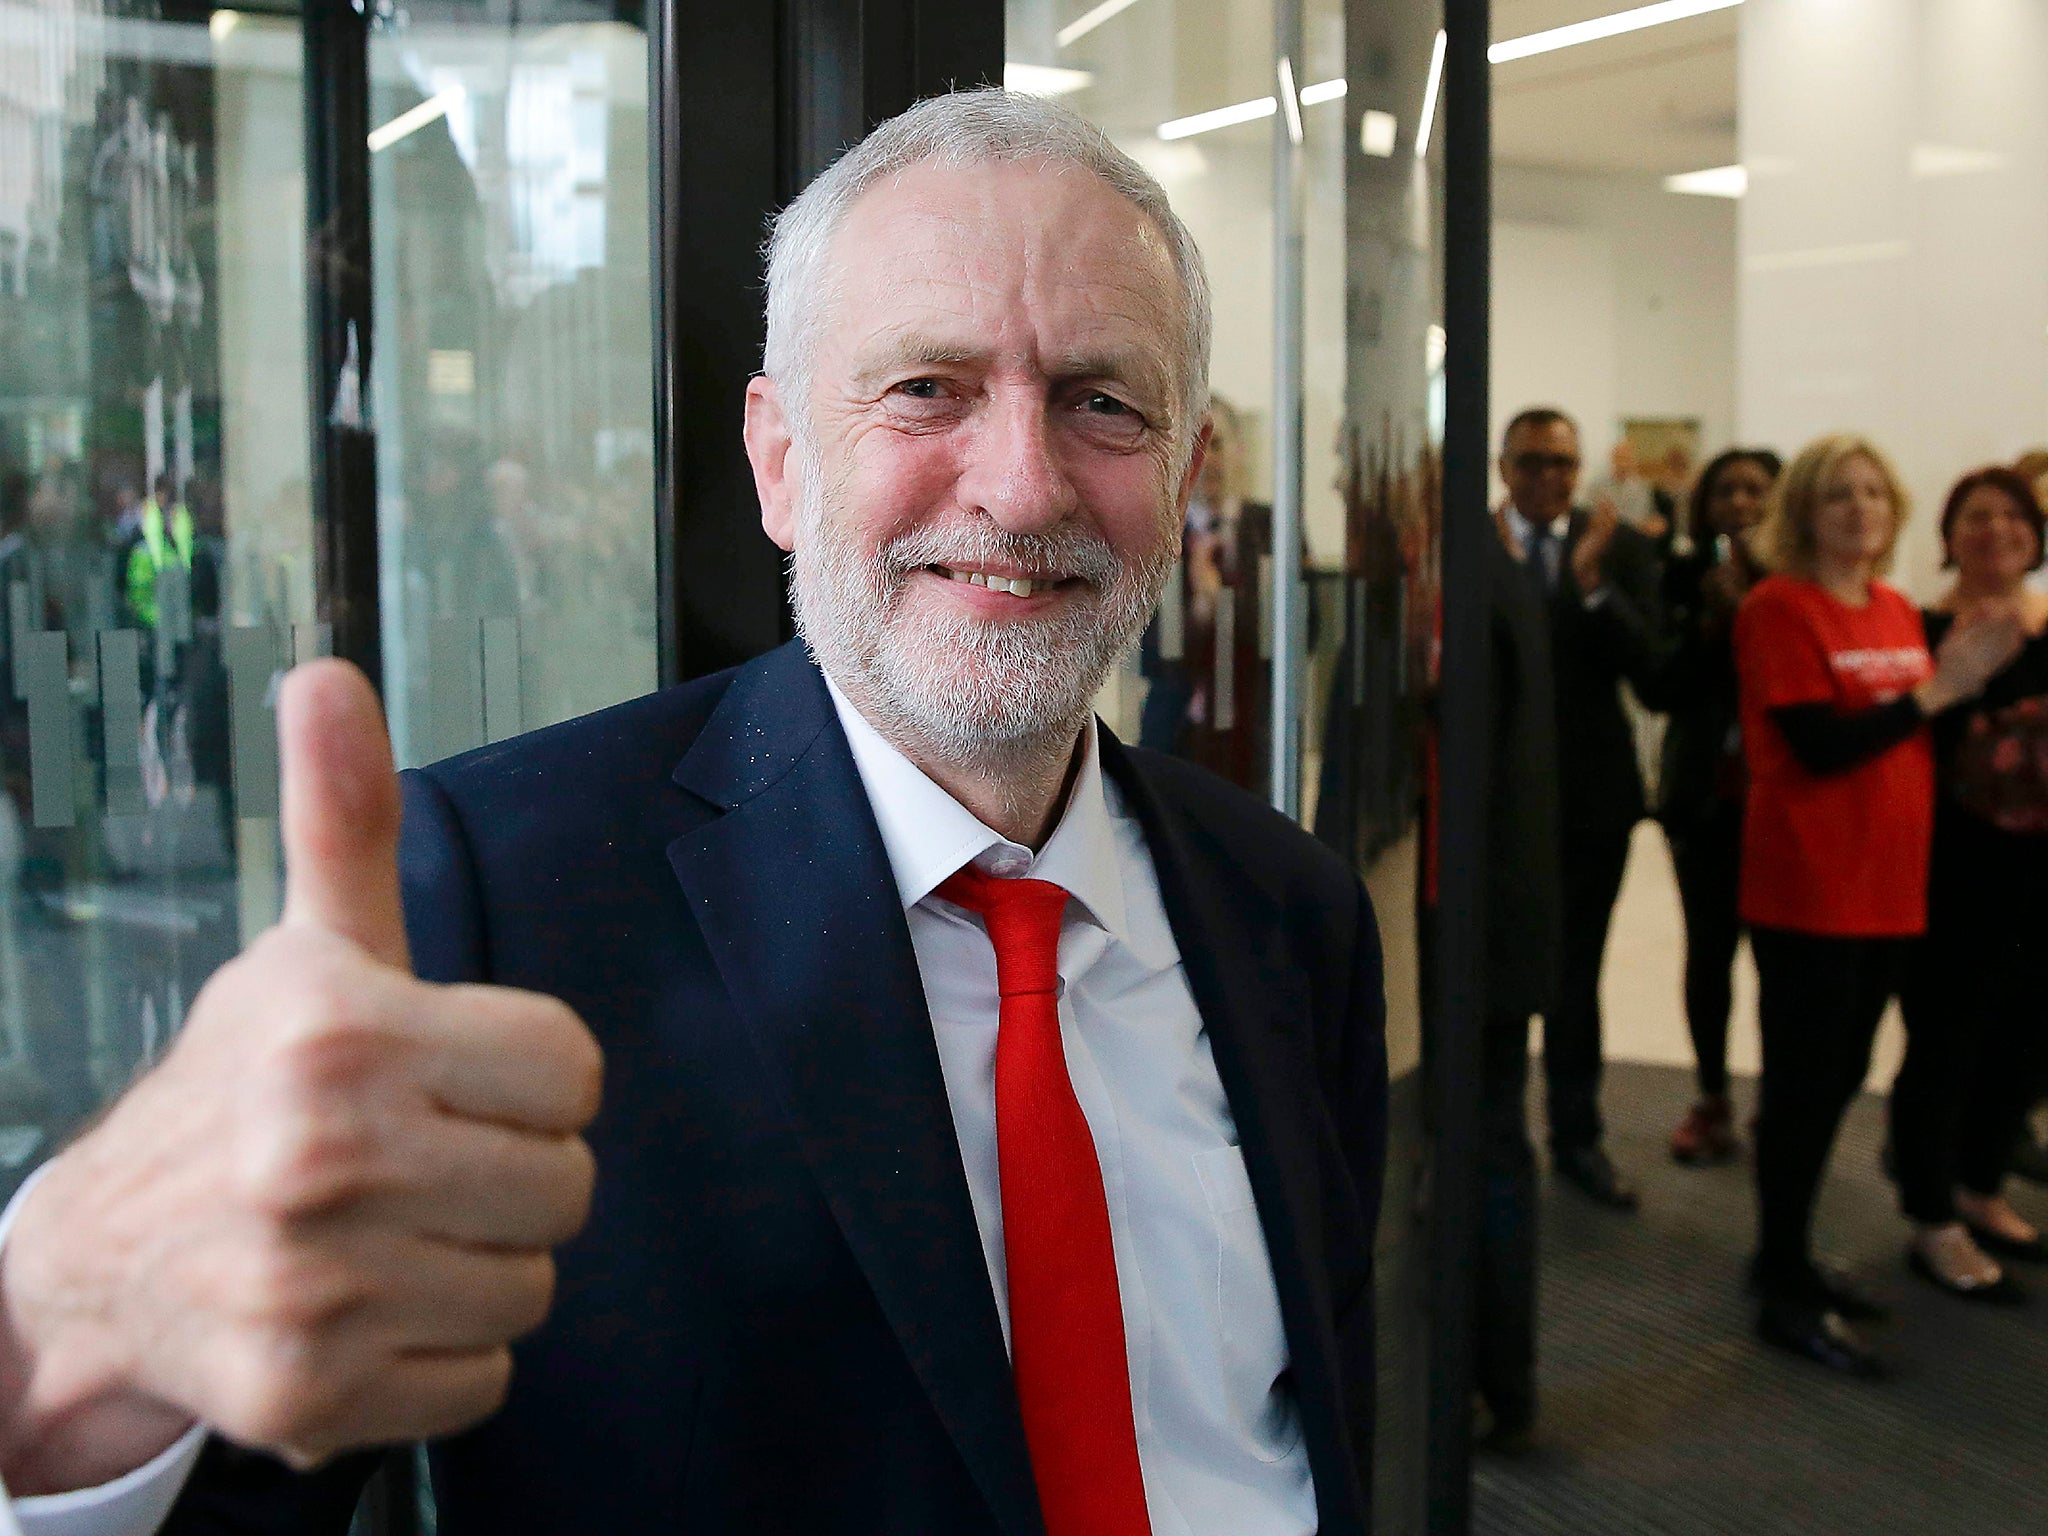 Jeremy Corbyn is said to have benefited from the youth vote at this election